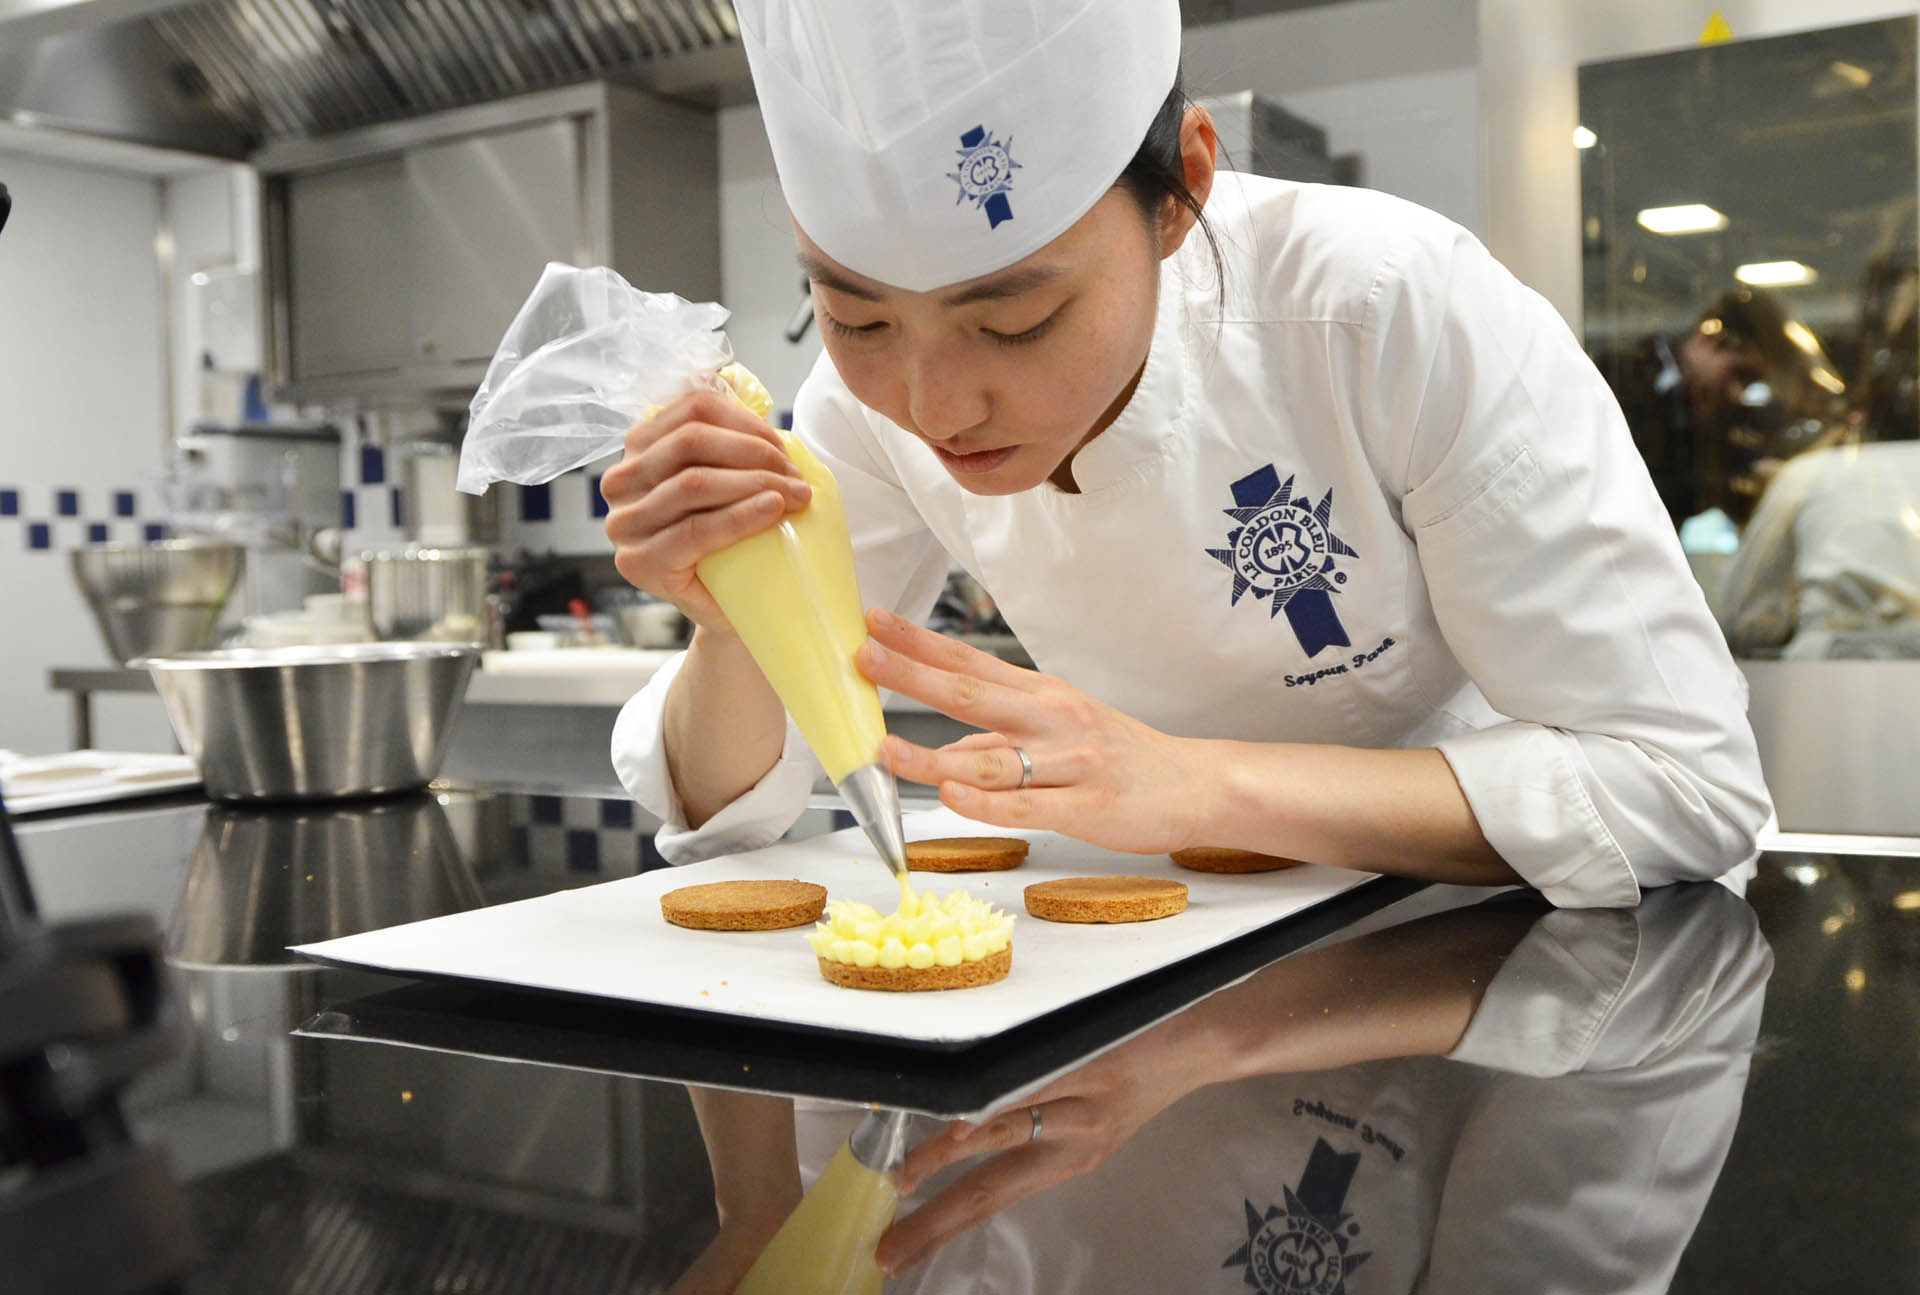 Meet Chef Park, pastry Chef